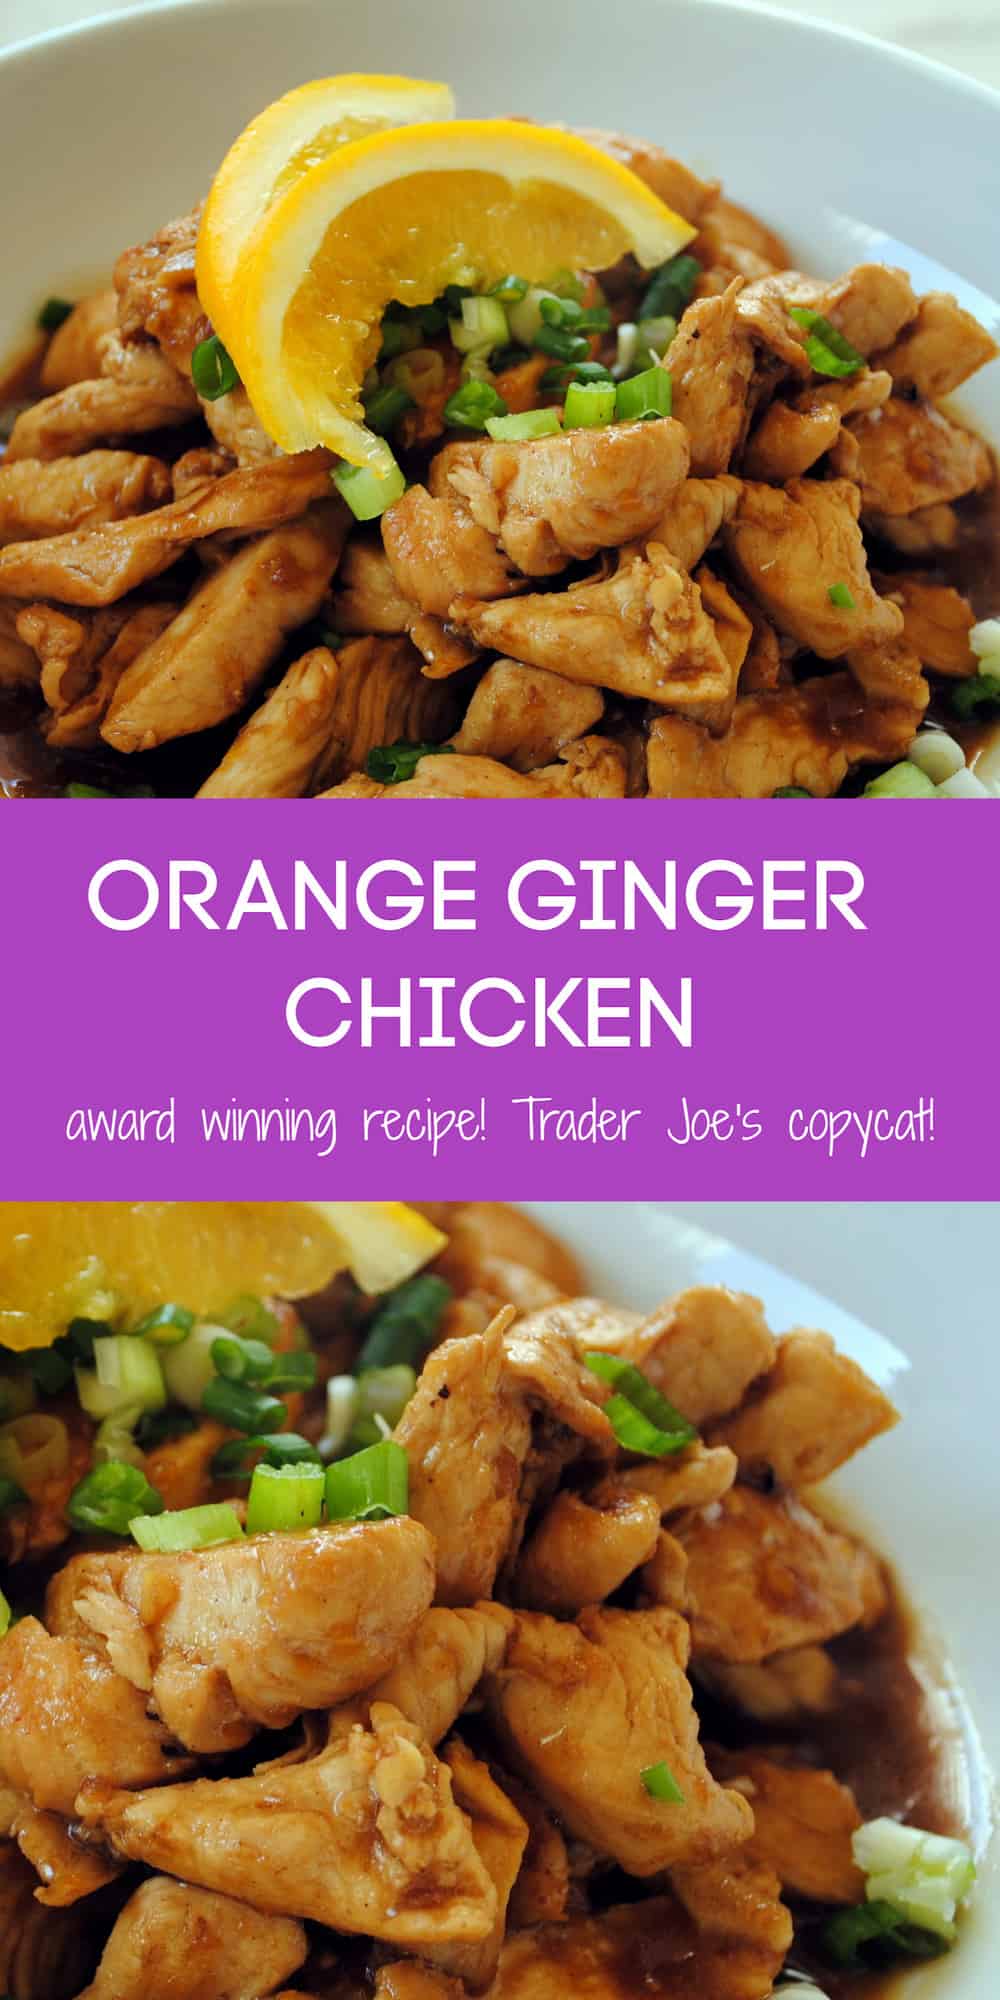 This award-winning Orange Ginger Chicken recipe is a healthier homemade alternative to takeout or Trader Joe's. The whole family will love this stir fried chicken breast glazed in orange ginger sauce. | foxeslovelemons.com